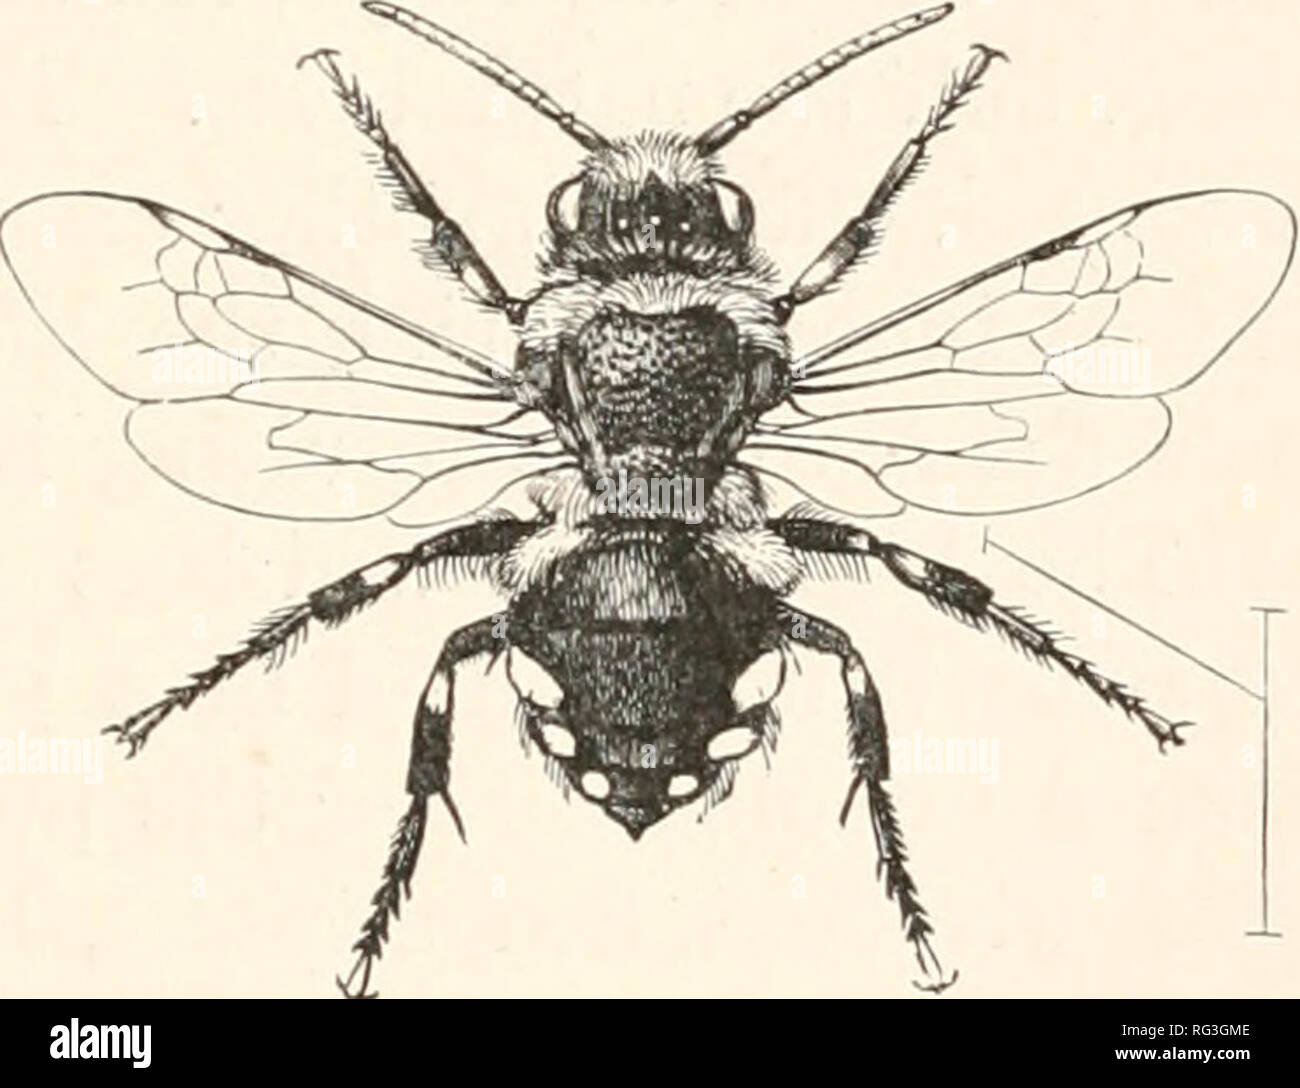 . The Cambridge natural history. Zoology. i PARASITIC BEES DENUDATAE 31 race. Why then should they attack the creatures ? Provided the parasites do not interfere in any unmannerly way with the hosts and their work, there is no reason why the latter should resent their presence. The wild bee that seals up its cell when it has laid an egg therein, and then leaves it for ever, has no conception of the form of its progeny ; never in the history of the race of the Andrena has a larva seen a perfect insect and survived thereafter, never has a perfect Insect seen a larva. There is no reason what- eve Stock Photo